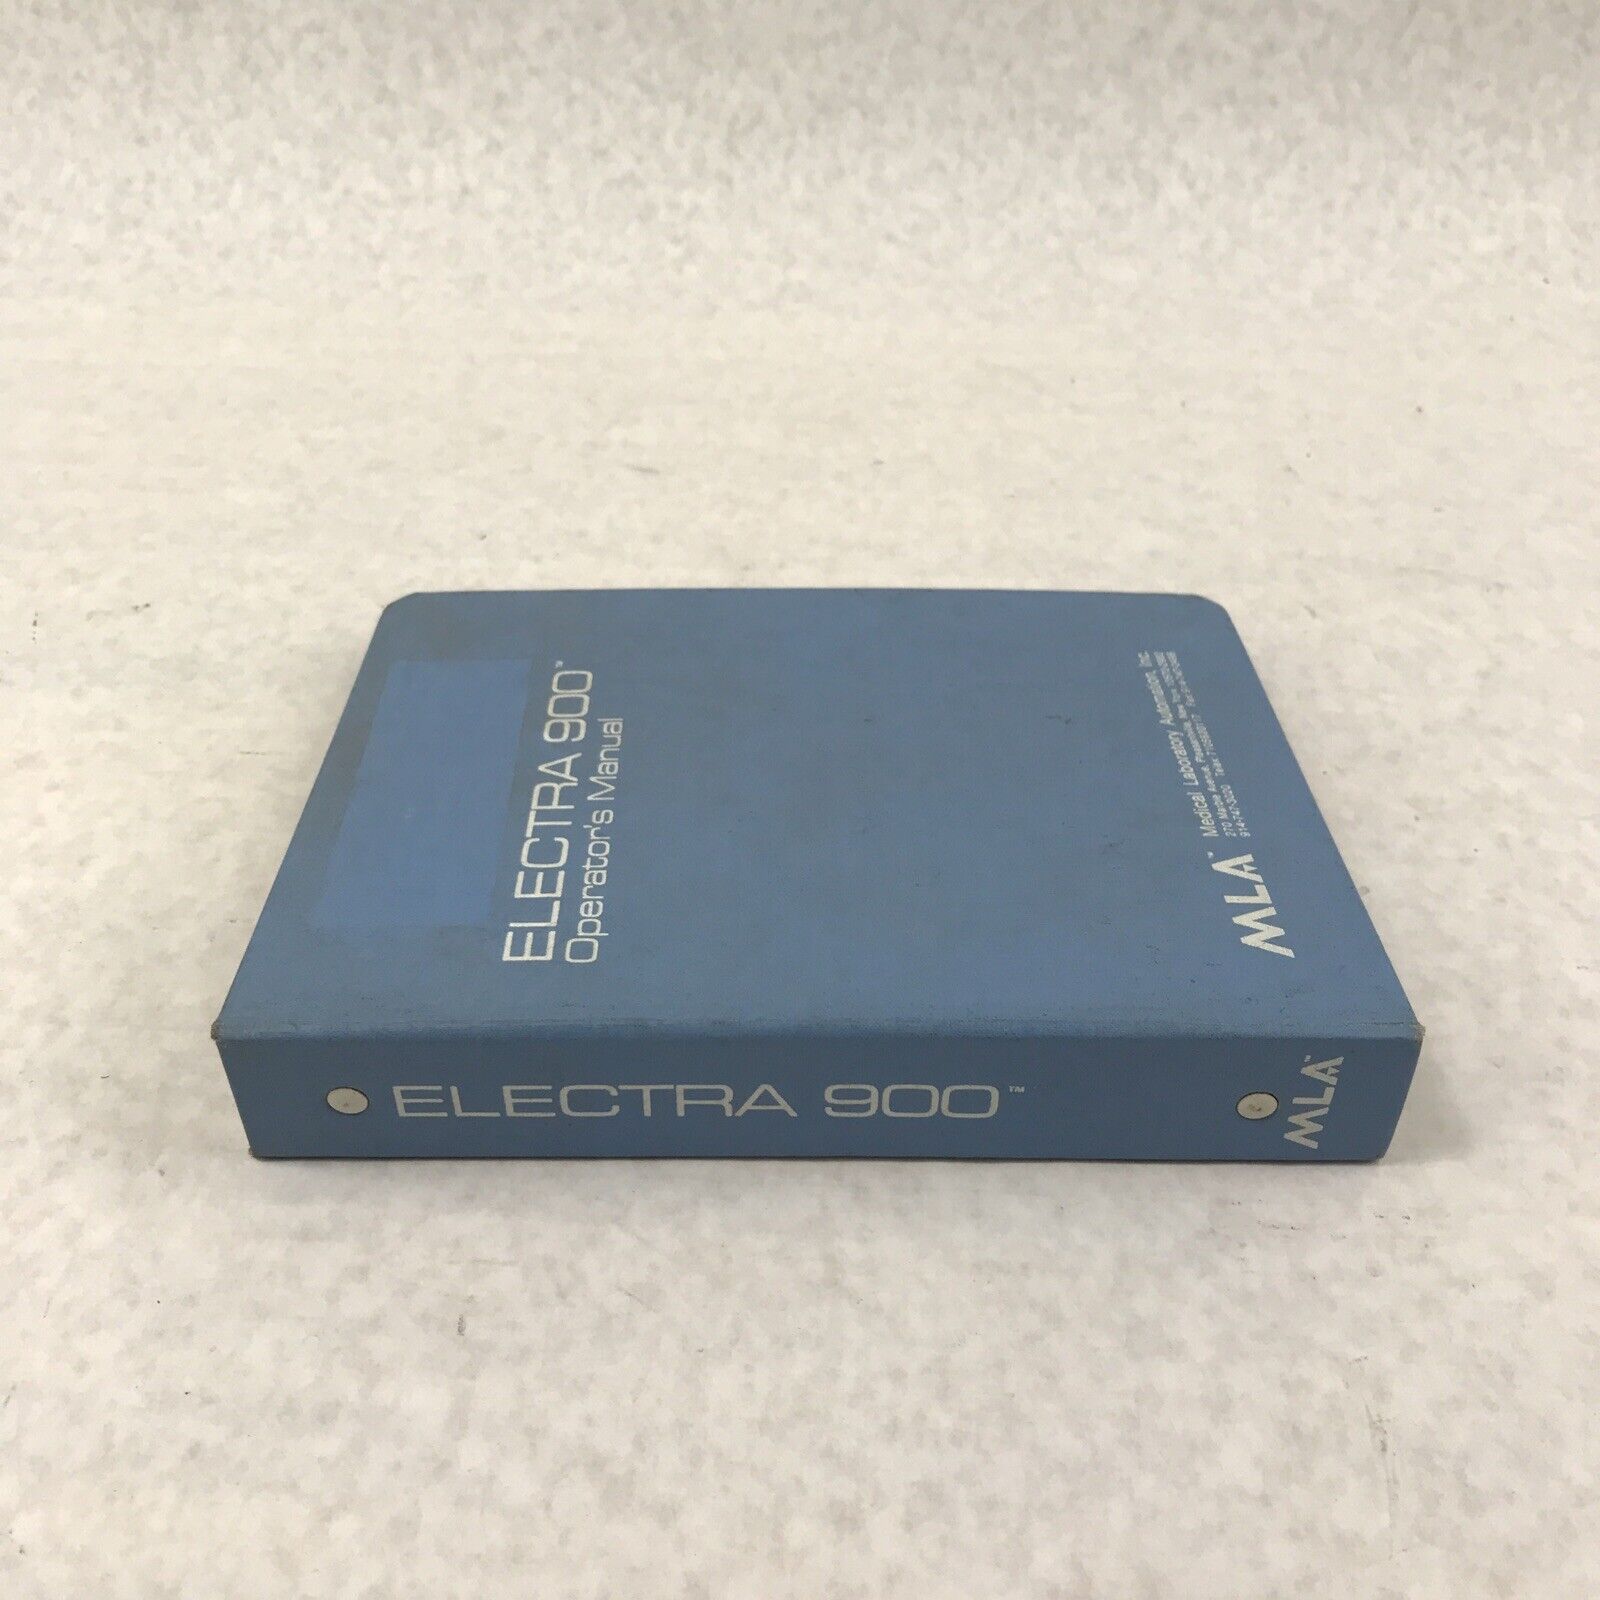 MLA Electra 900 Medical Laboratory Operators Manual for Electra 900 and 900C